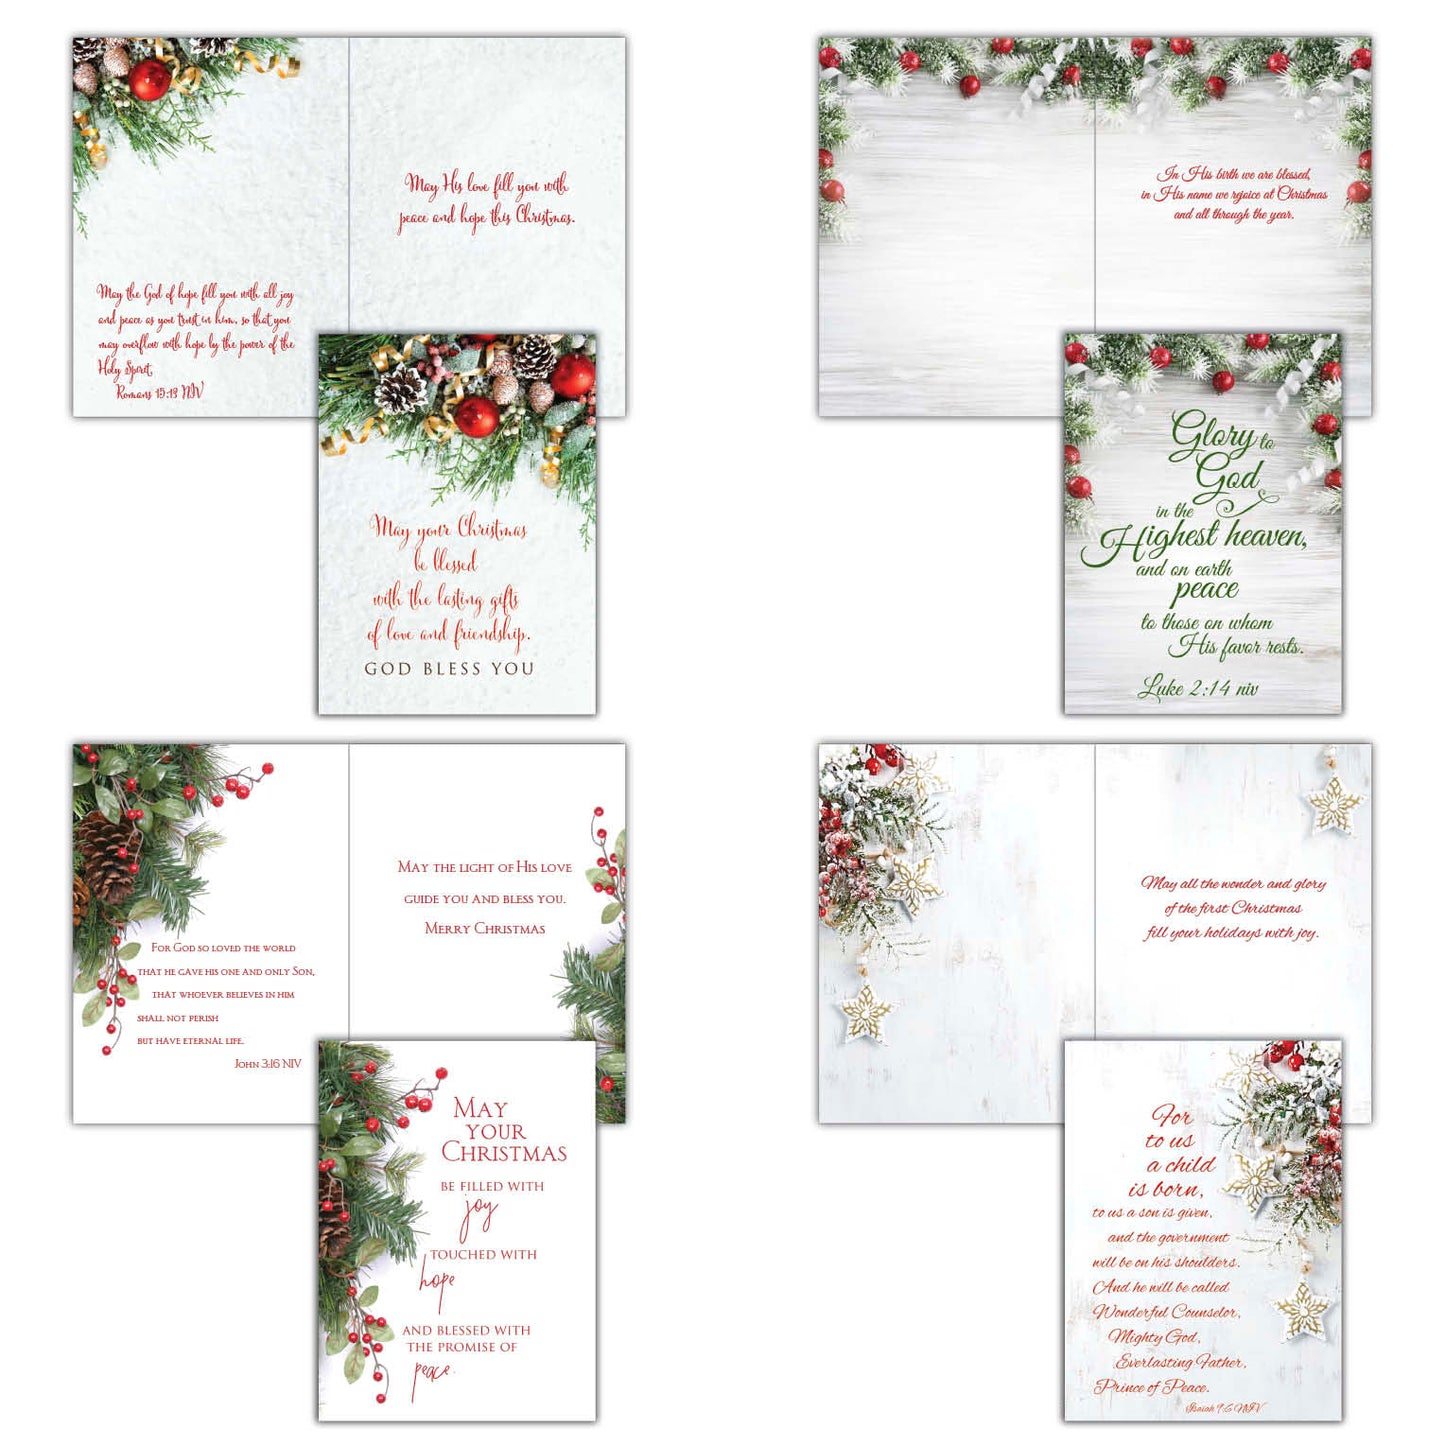 Boxed Christmas Cards - Blessings, 12 NIV Cards and Envelopes